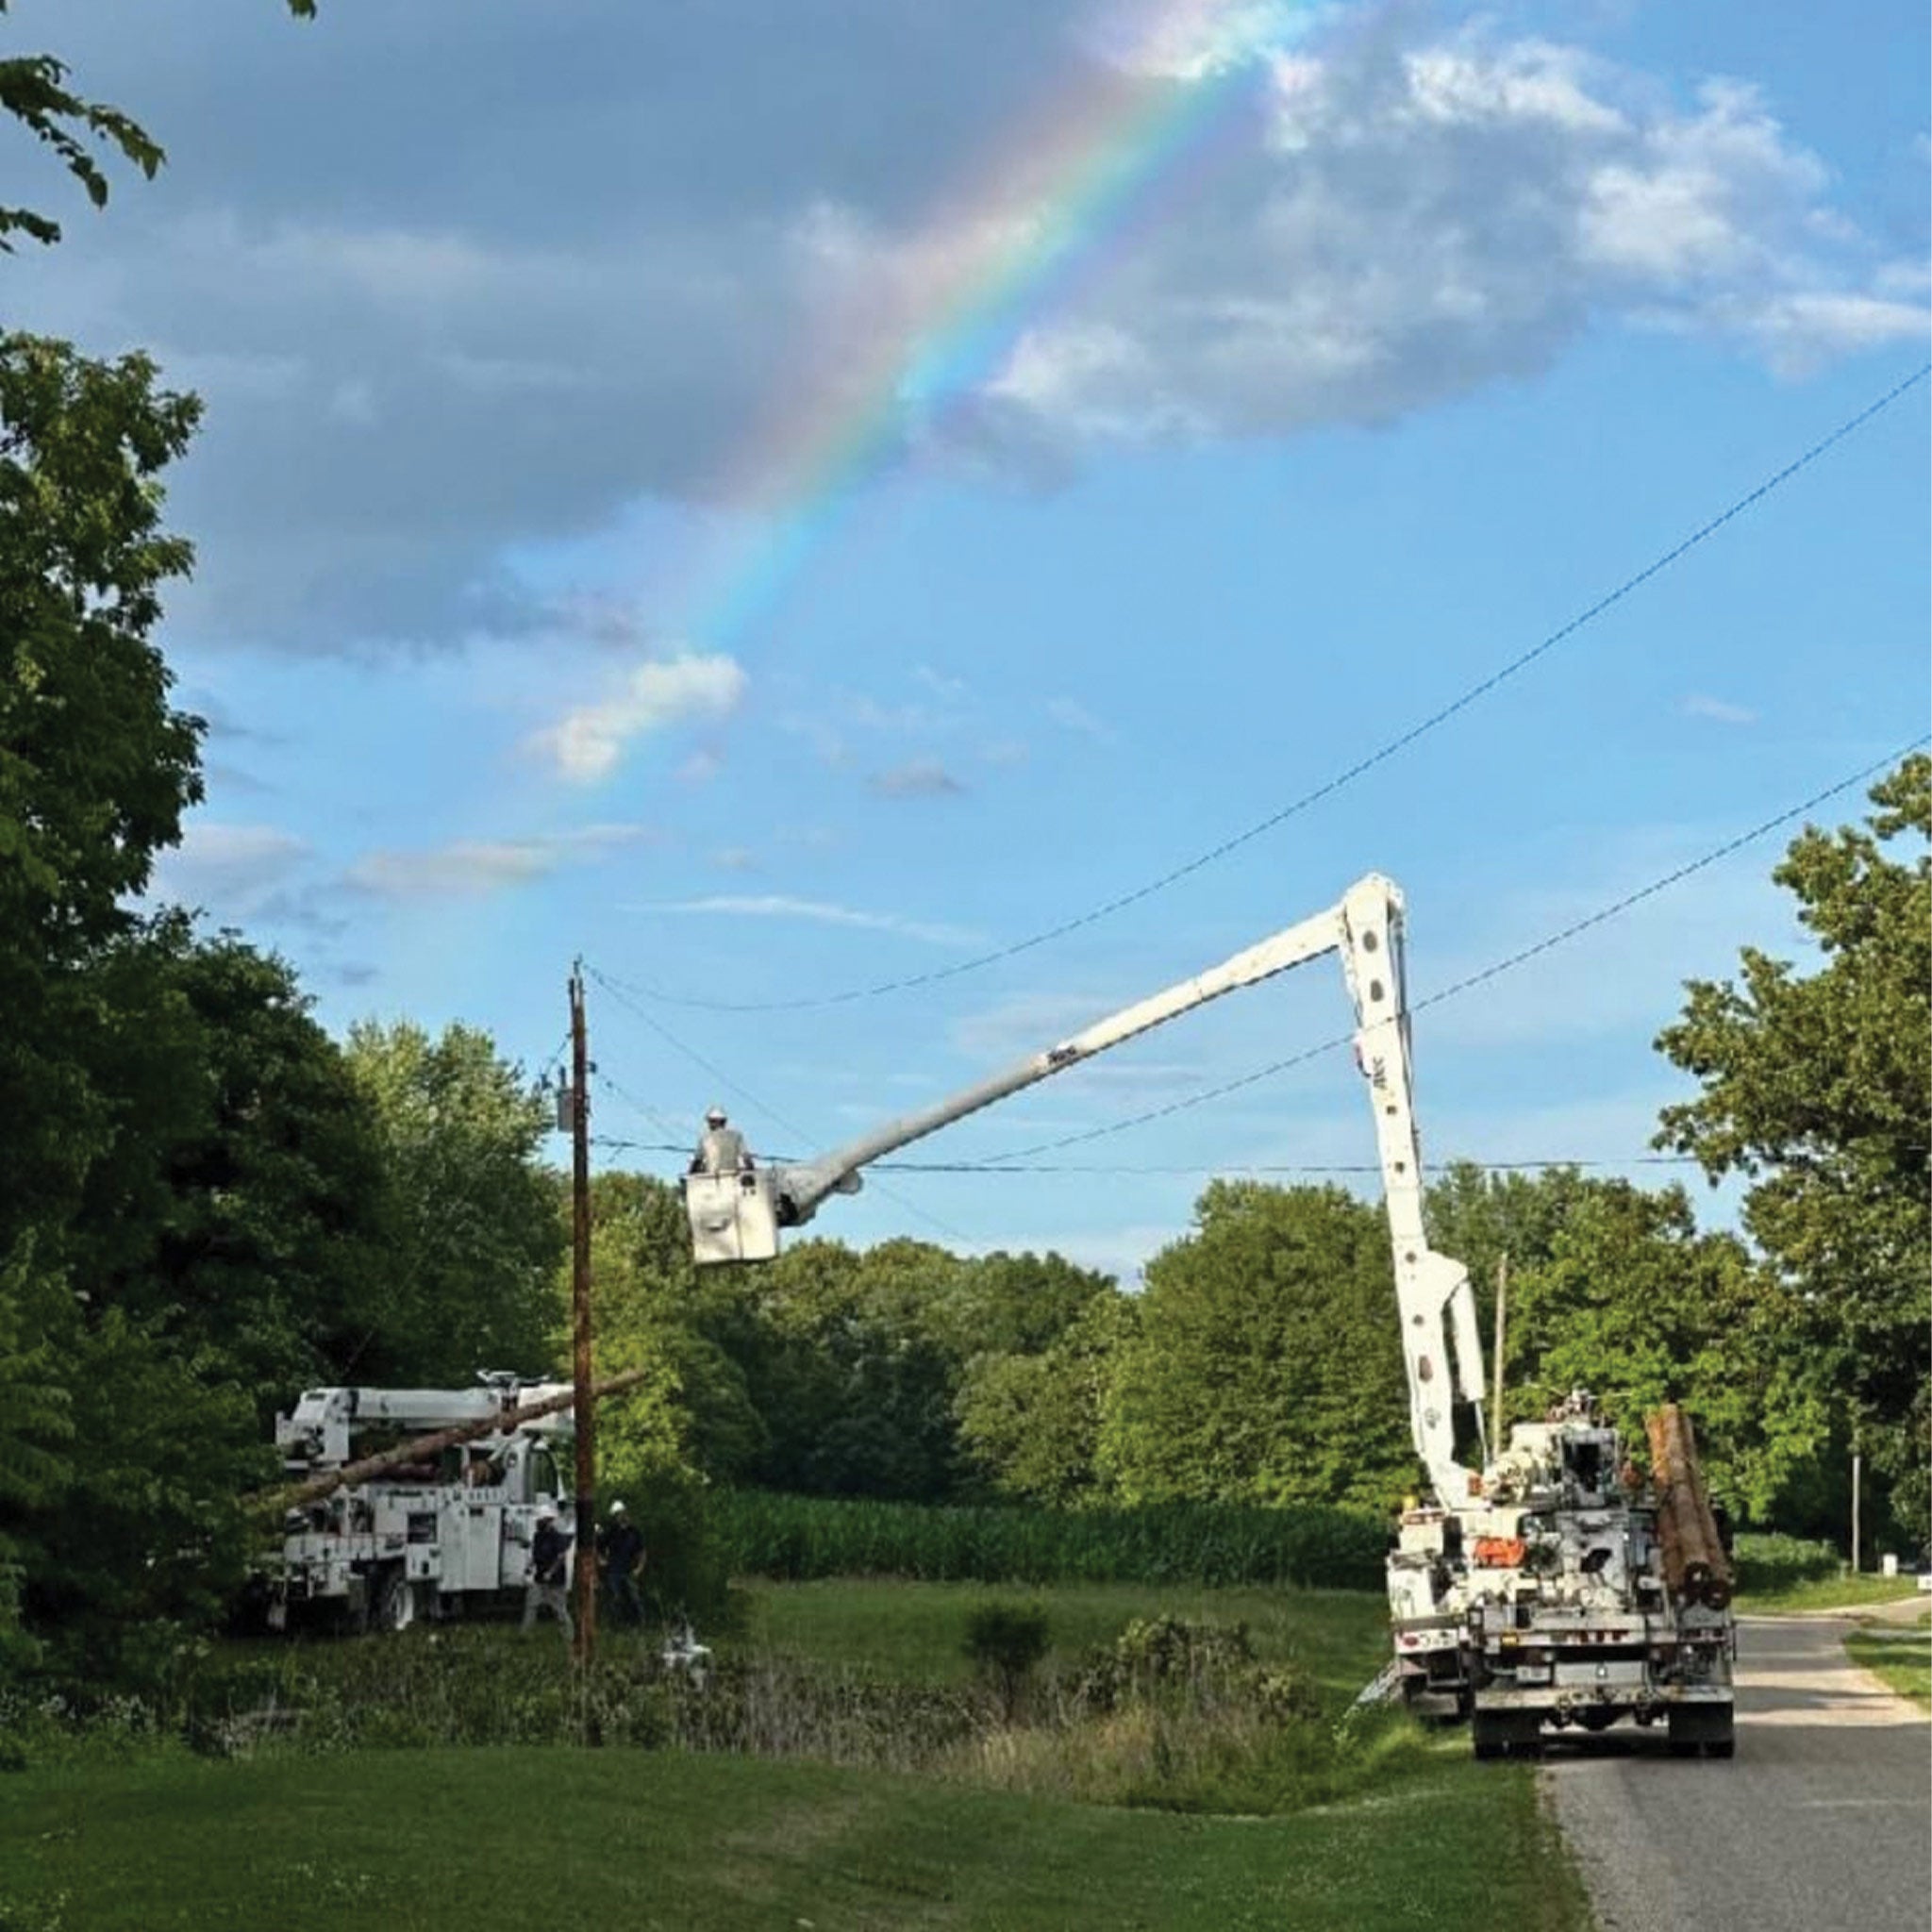 White bucket trucks working on electric lines with a rainbow above them